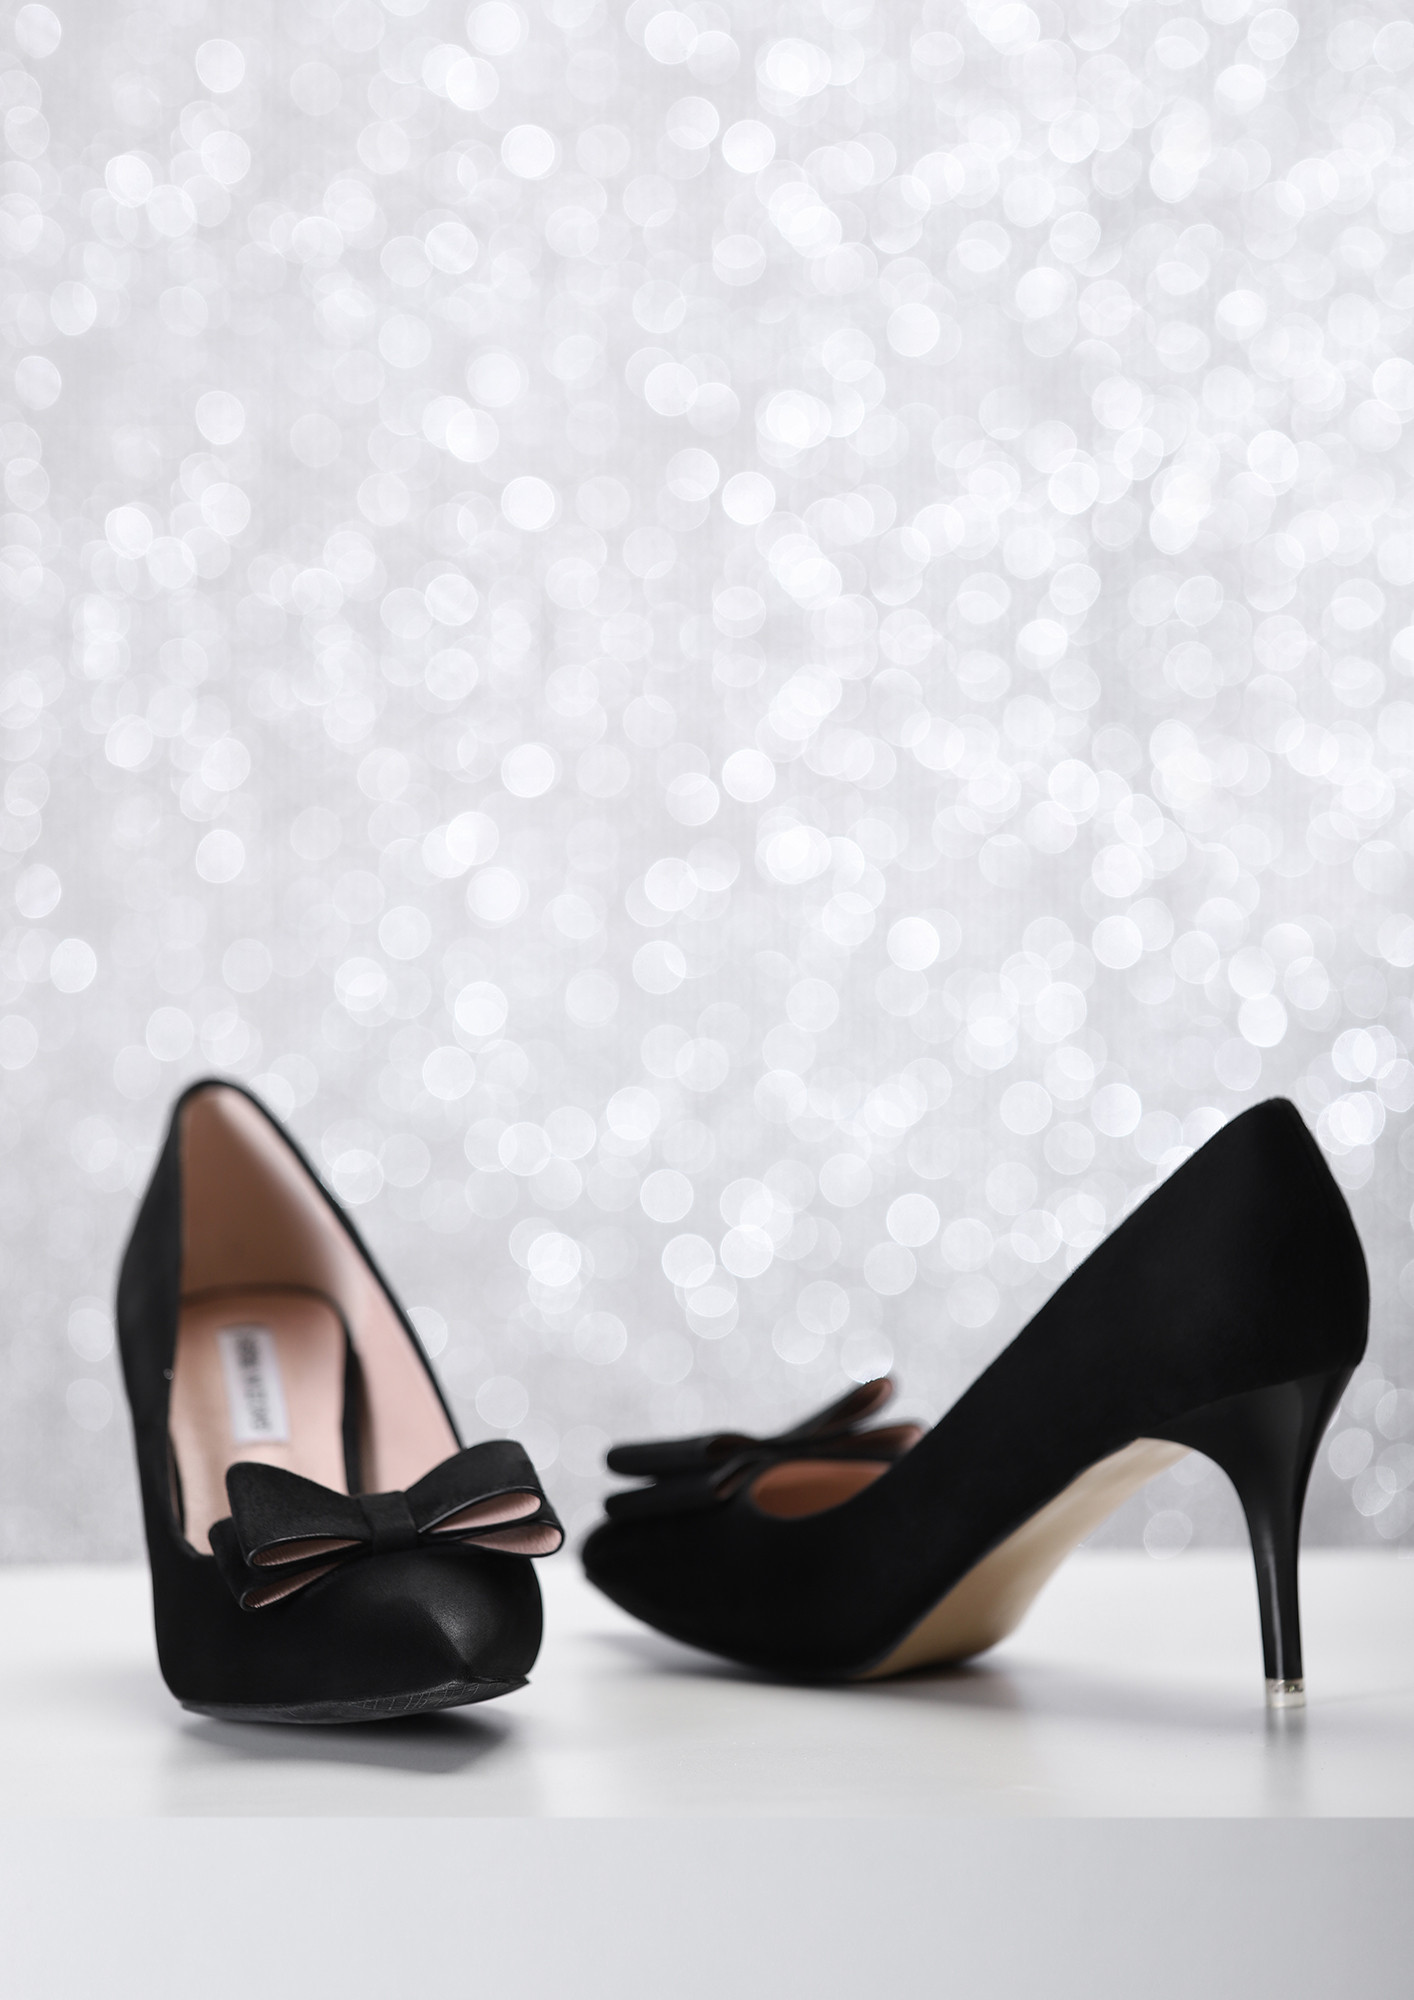 BOW FOR A BOW BLACK PUMPS